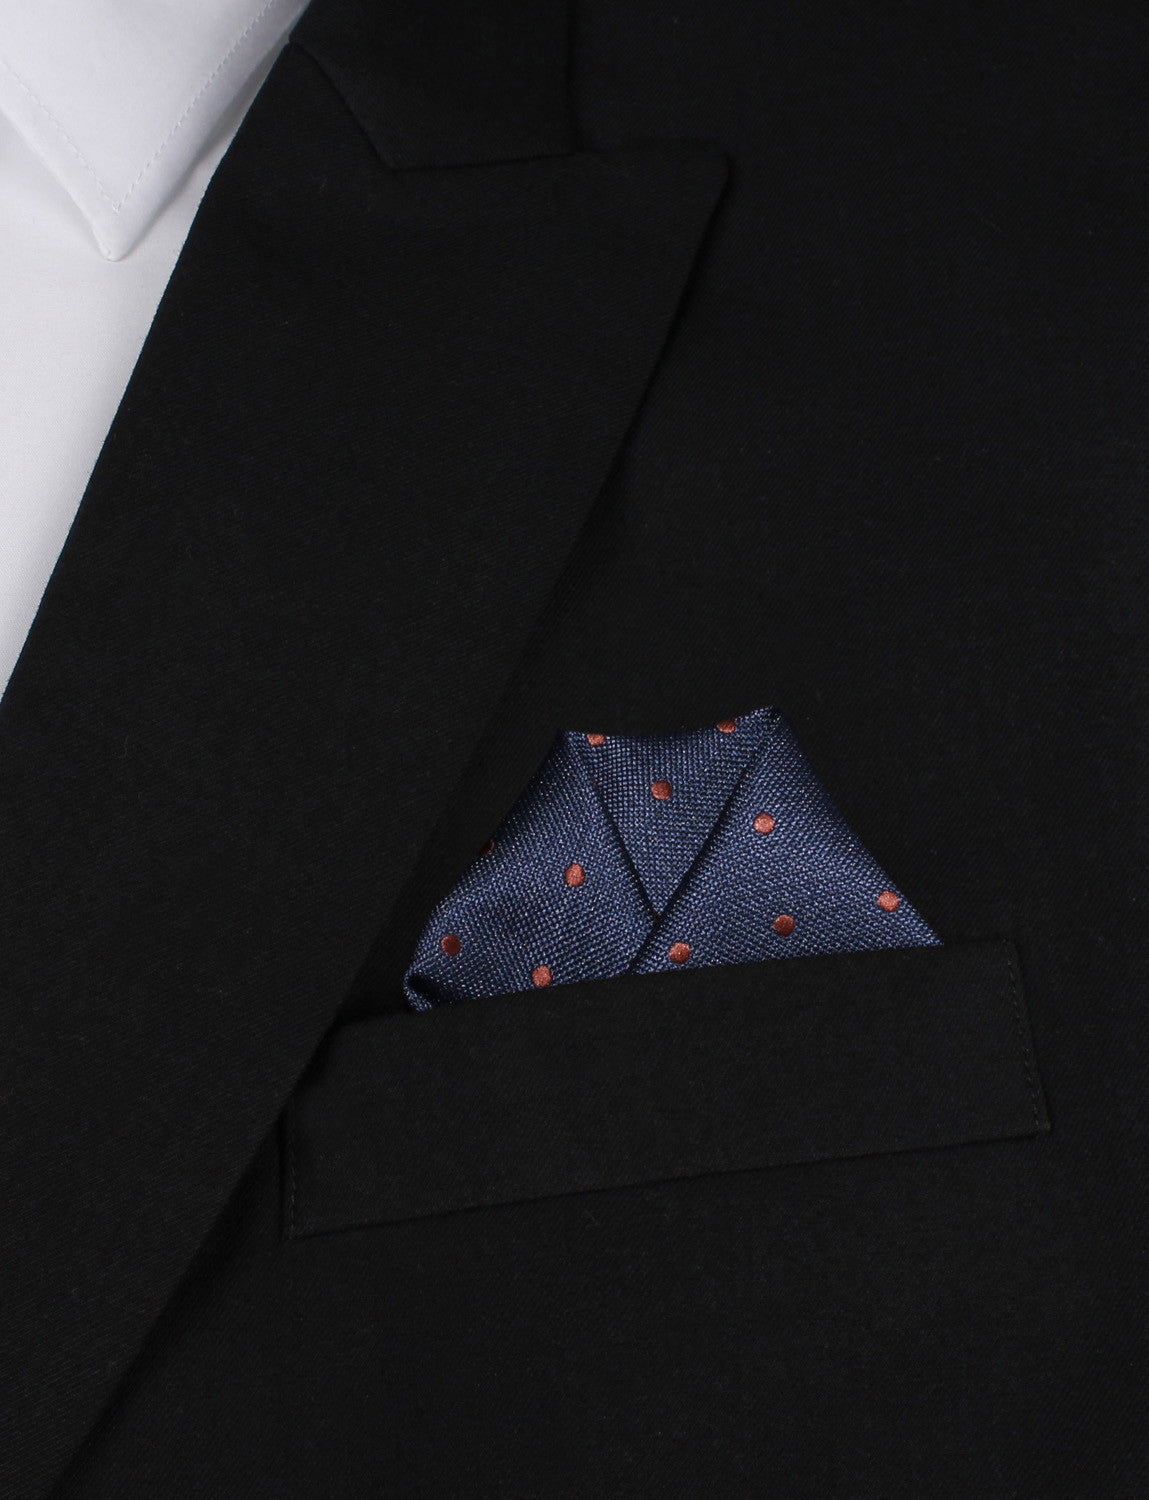 Navy Blue with Brown Polka Dots Winged Puff Pocket Square Fold